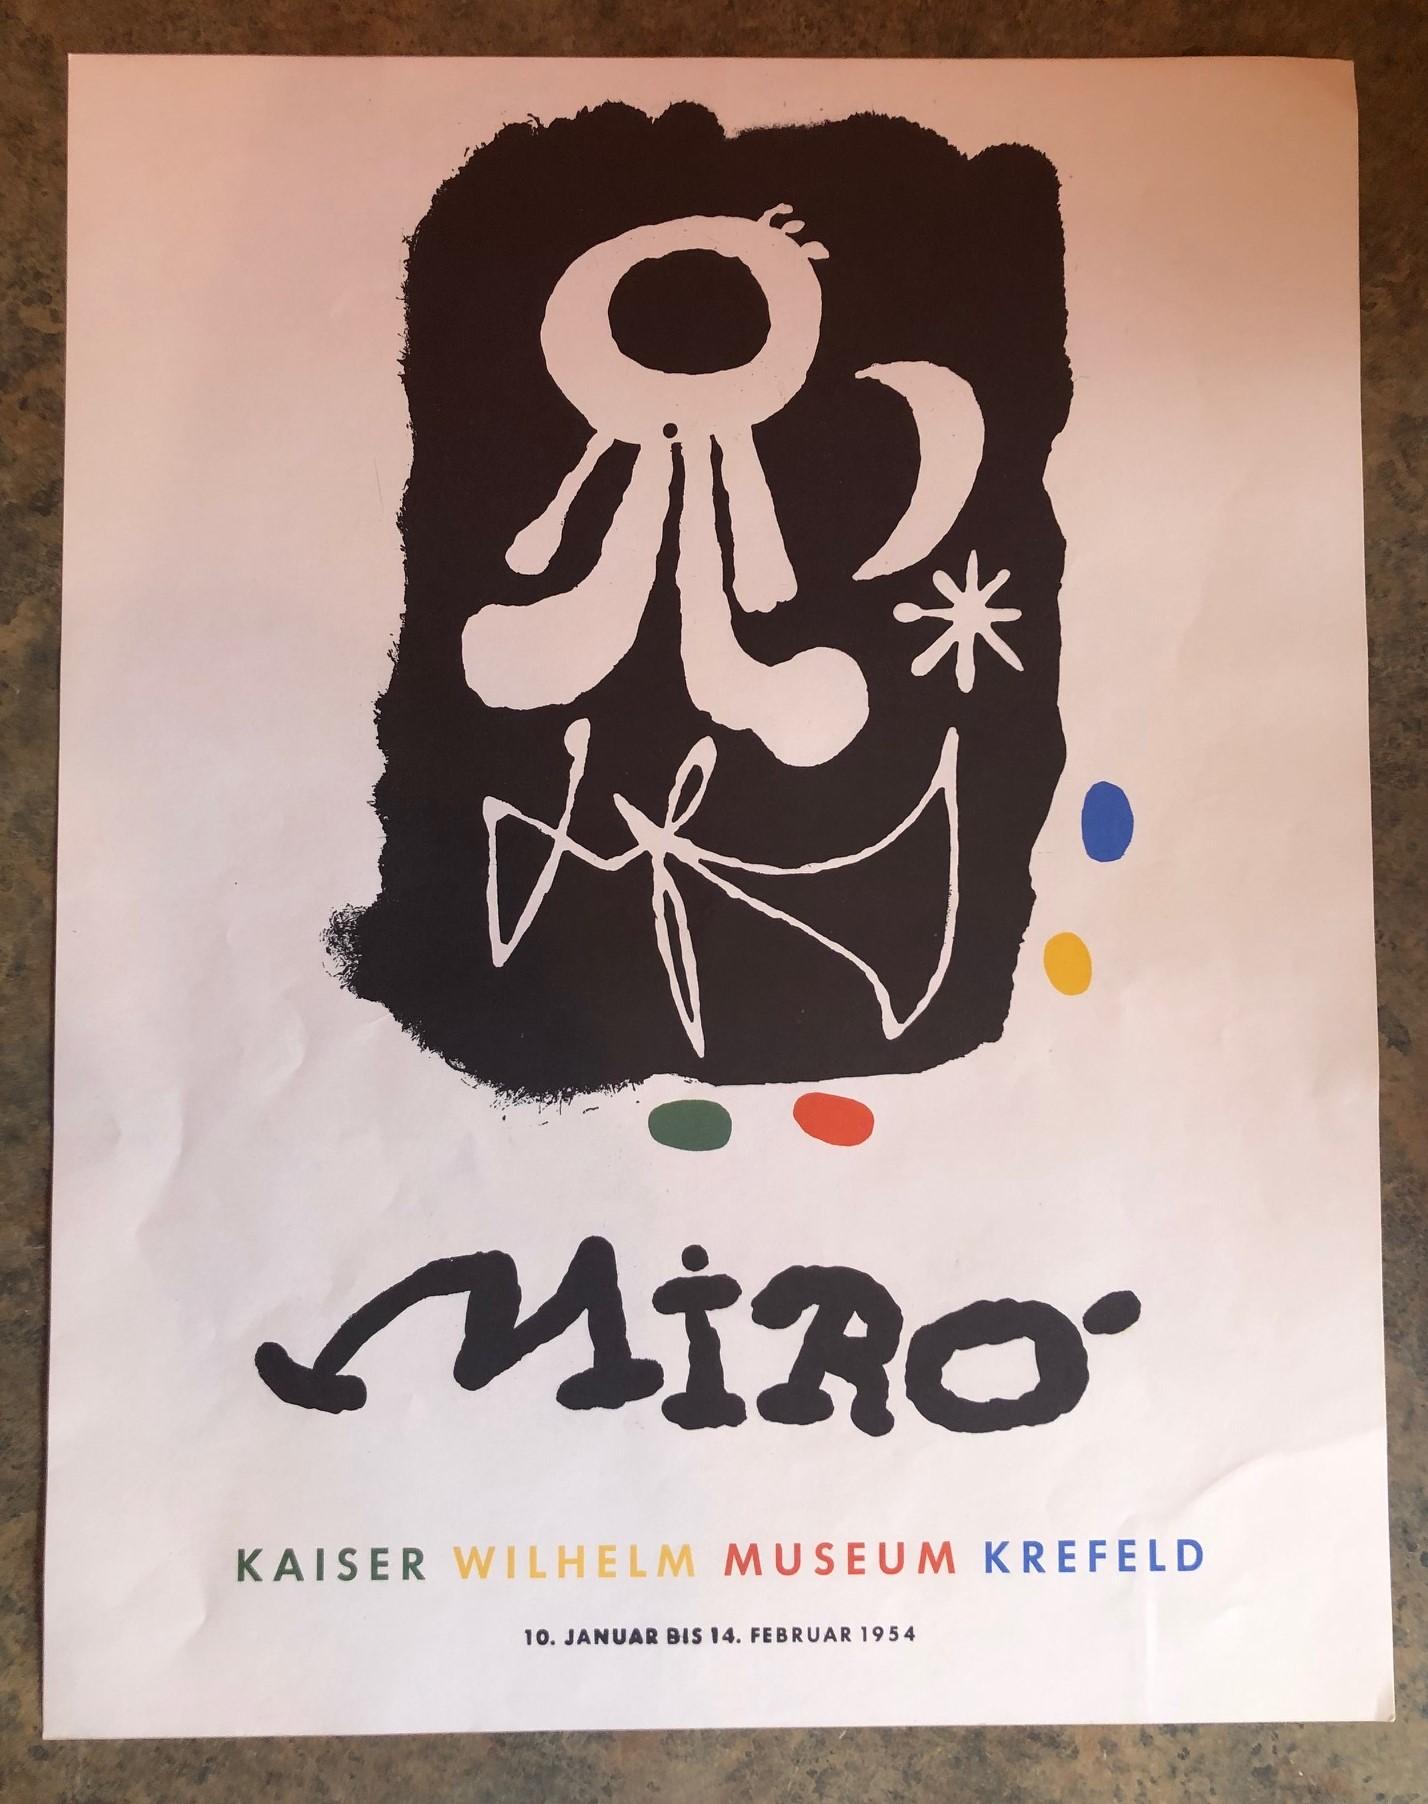 Highly collectible midcentury Joan Miro Kaiser Wilhelm Museum Krefeld lithograph art poster to advertise an exhibition in West Germany, circa 1950s. The piece is from the French Posters Collection and is in very nice unframed condition with limited